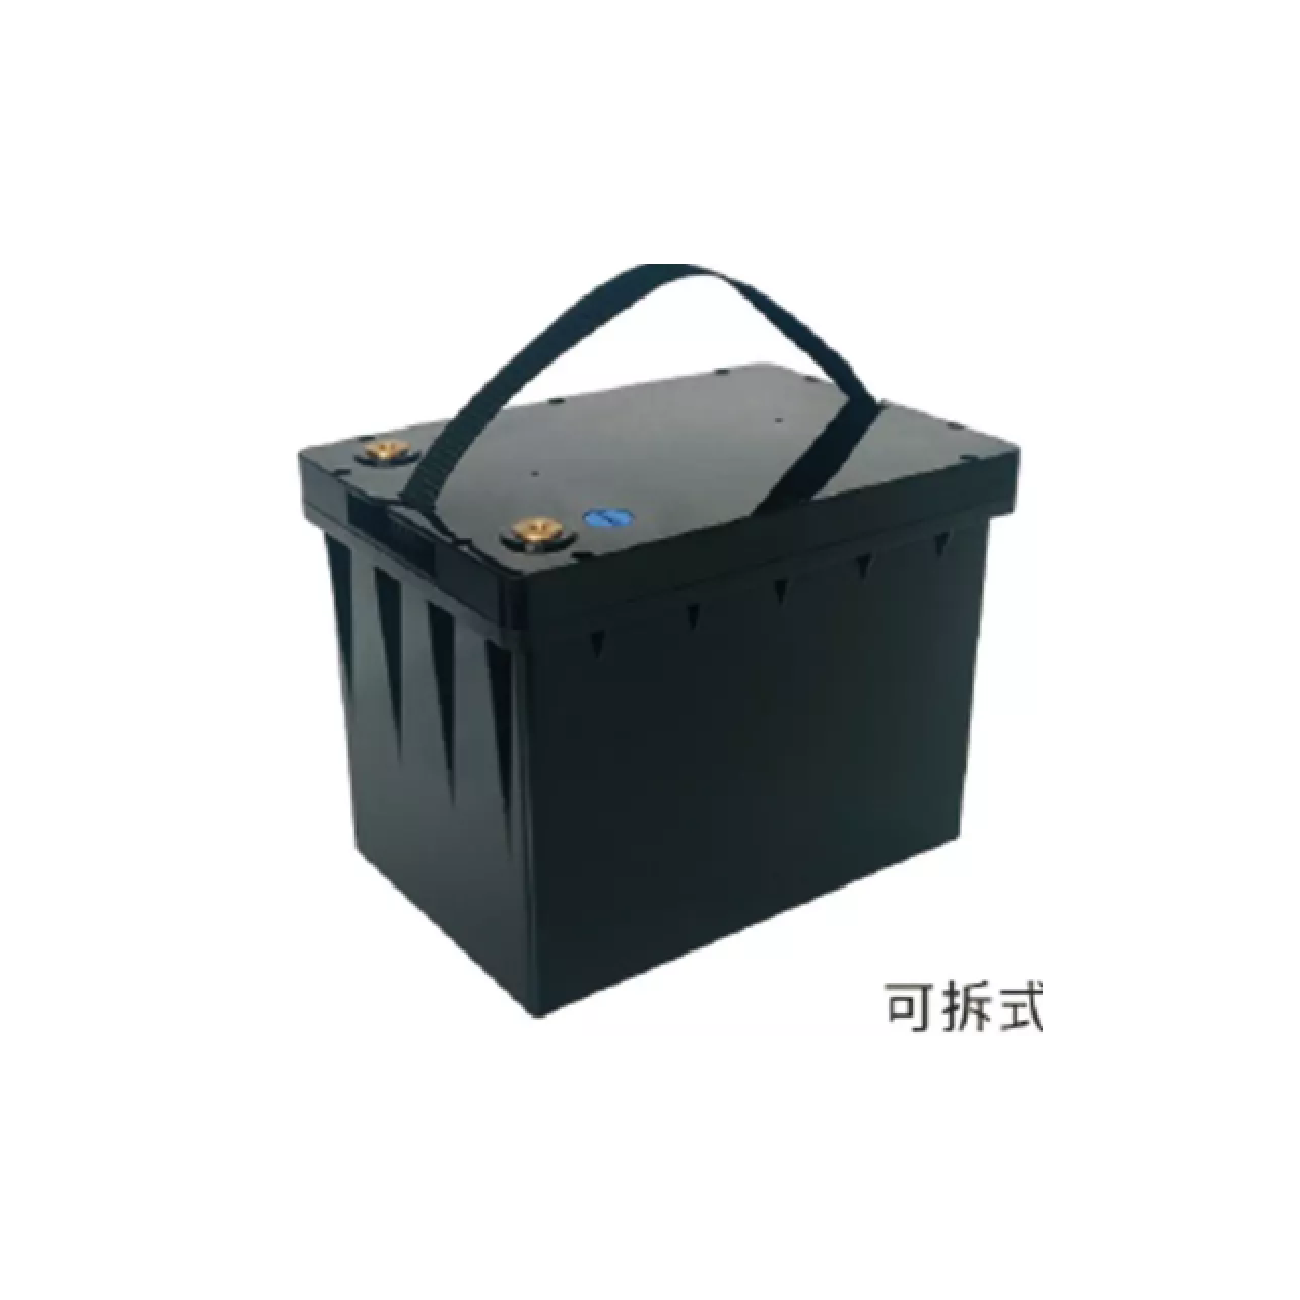 Selection and attention of LiFePO4 batteries/pack